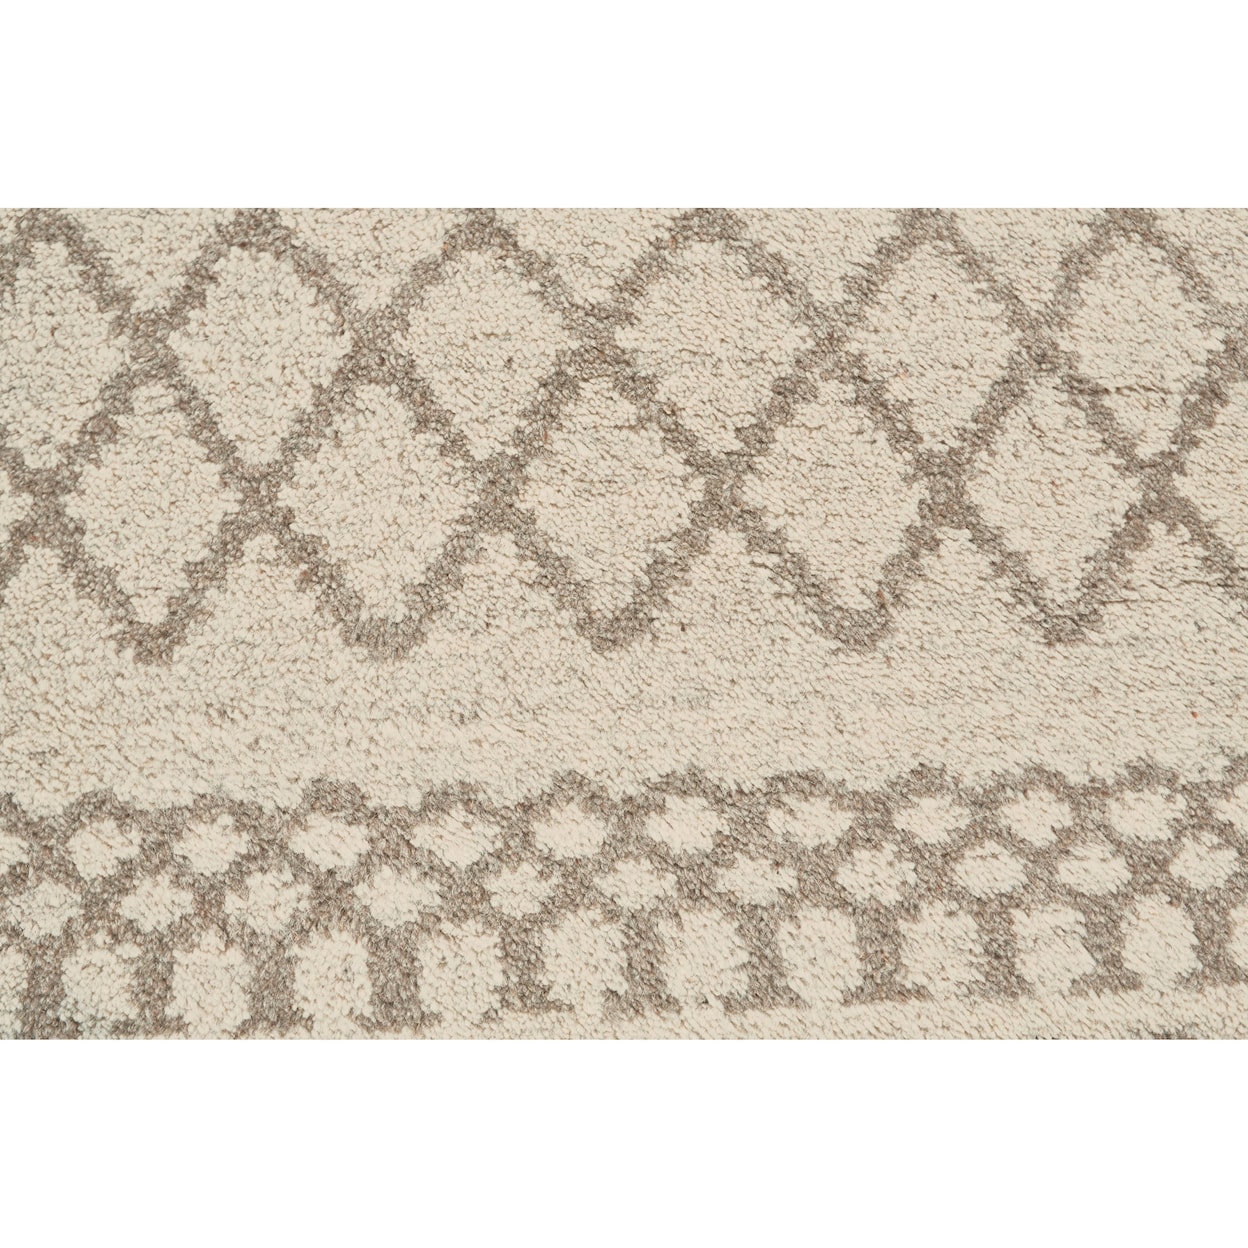 Feizy Rugs Barbary Natural/Ivory 9'-6" x 13'-6" Area Rug